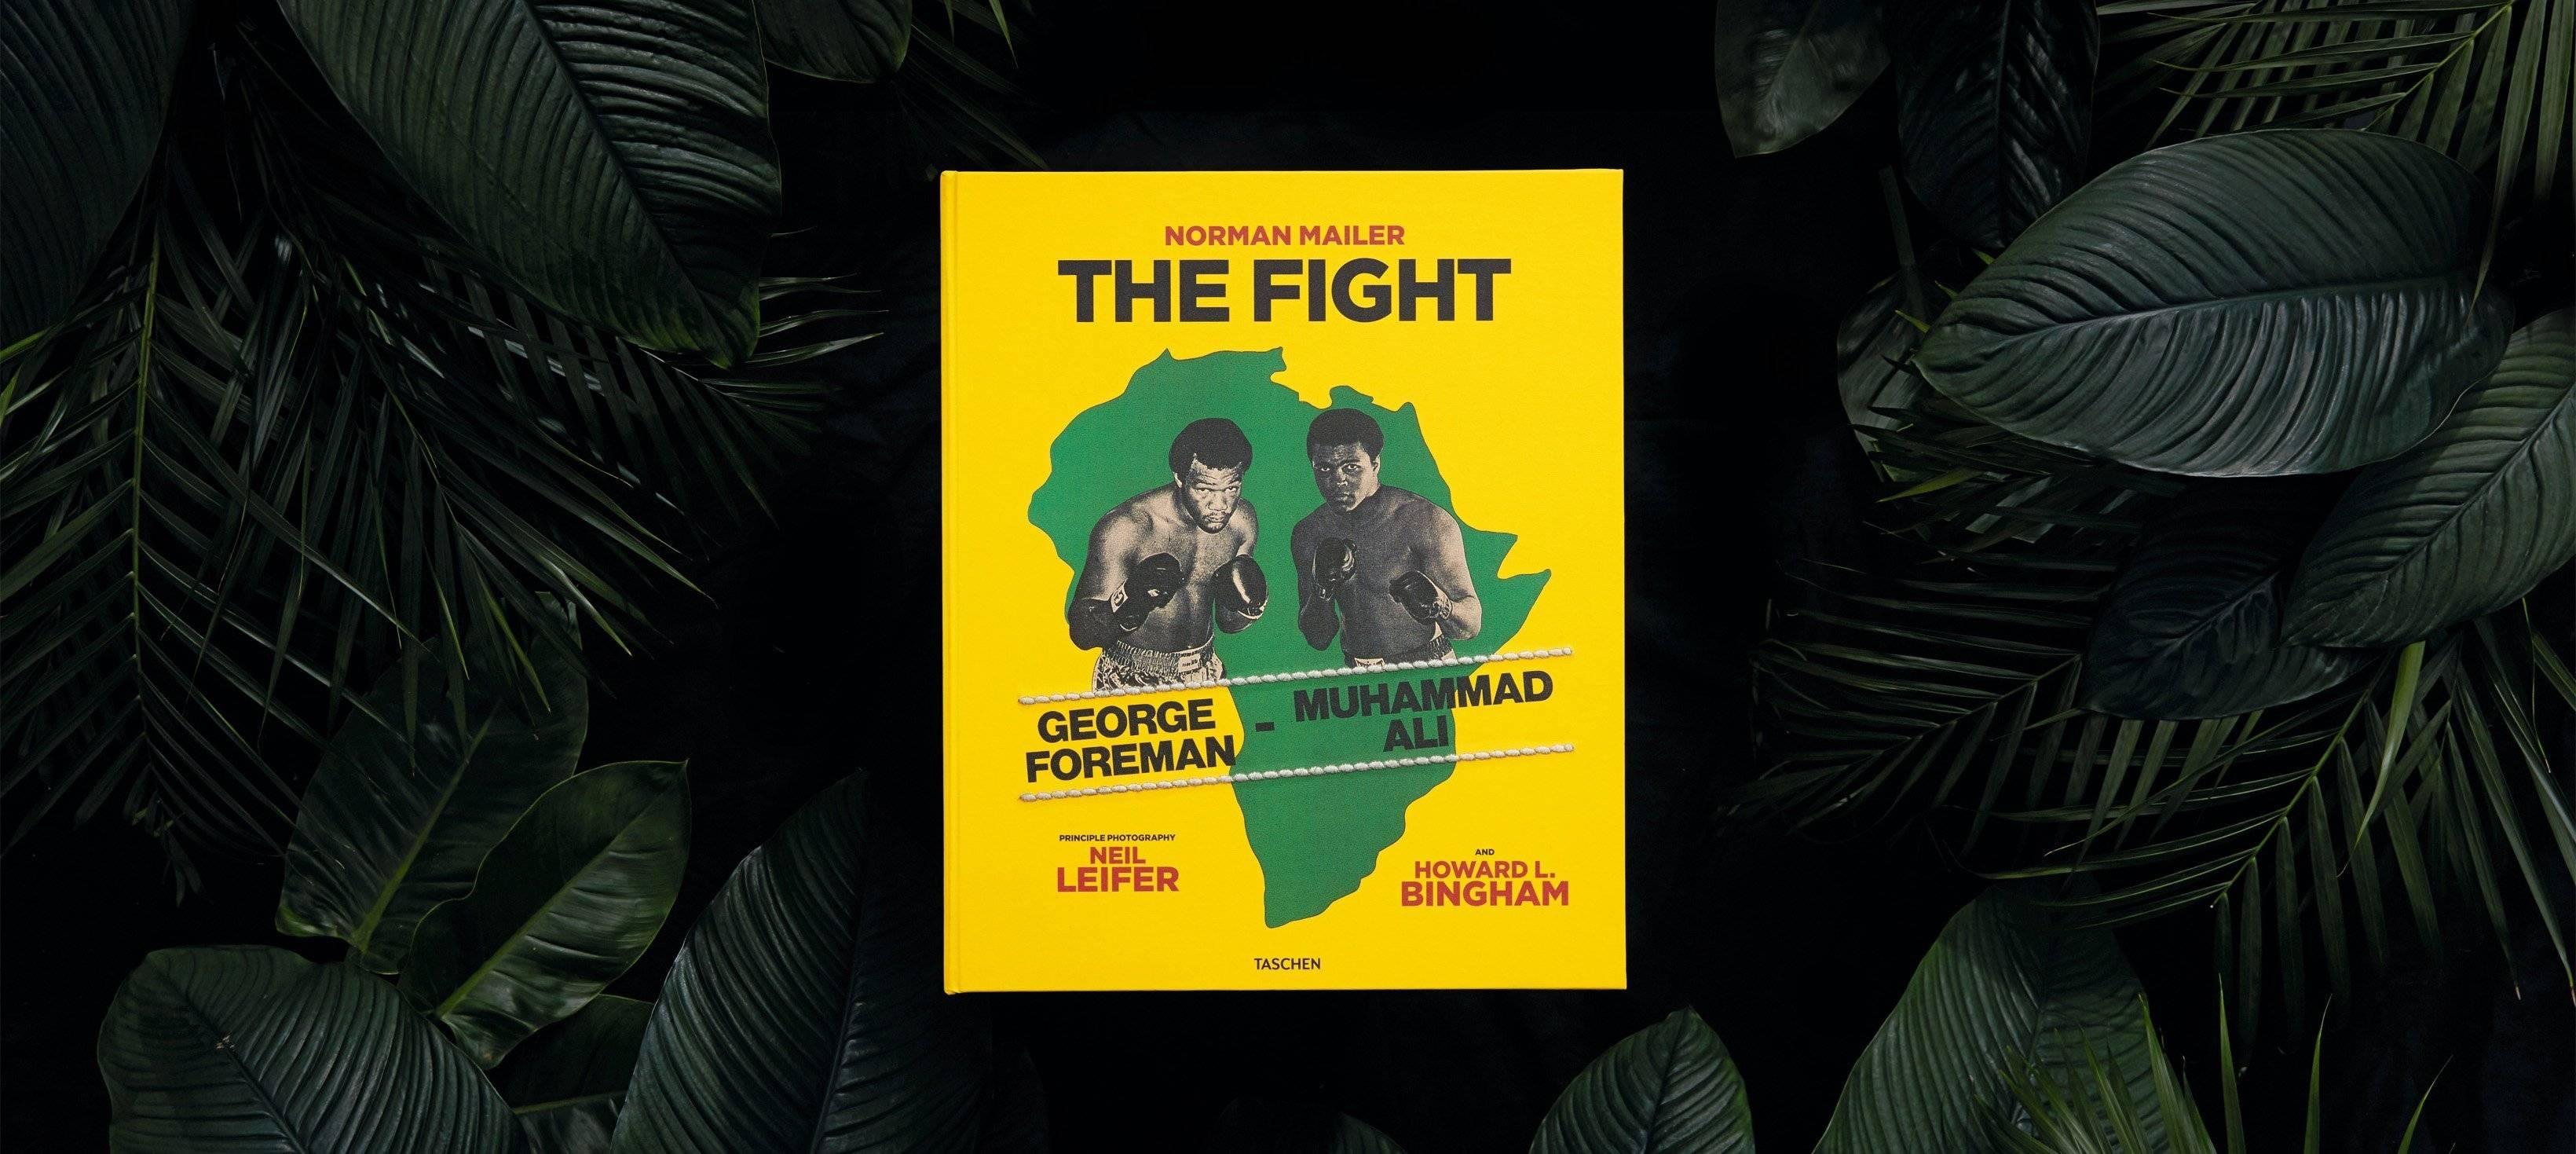 Hardcover in clamshell box. Measures: 14.4 x 17.3 in., 260 pages

On October 30, 1974, in Kinshasa, Zaire, at the virtual center of Africa, two African American boxers were paid five million dollars apiece to confront each other in an epic match.